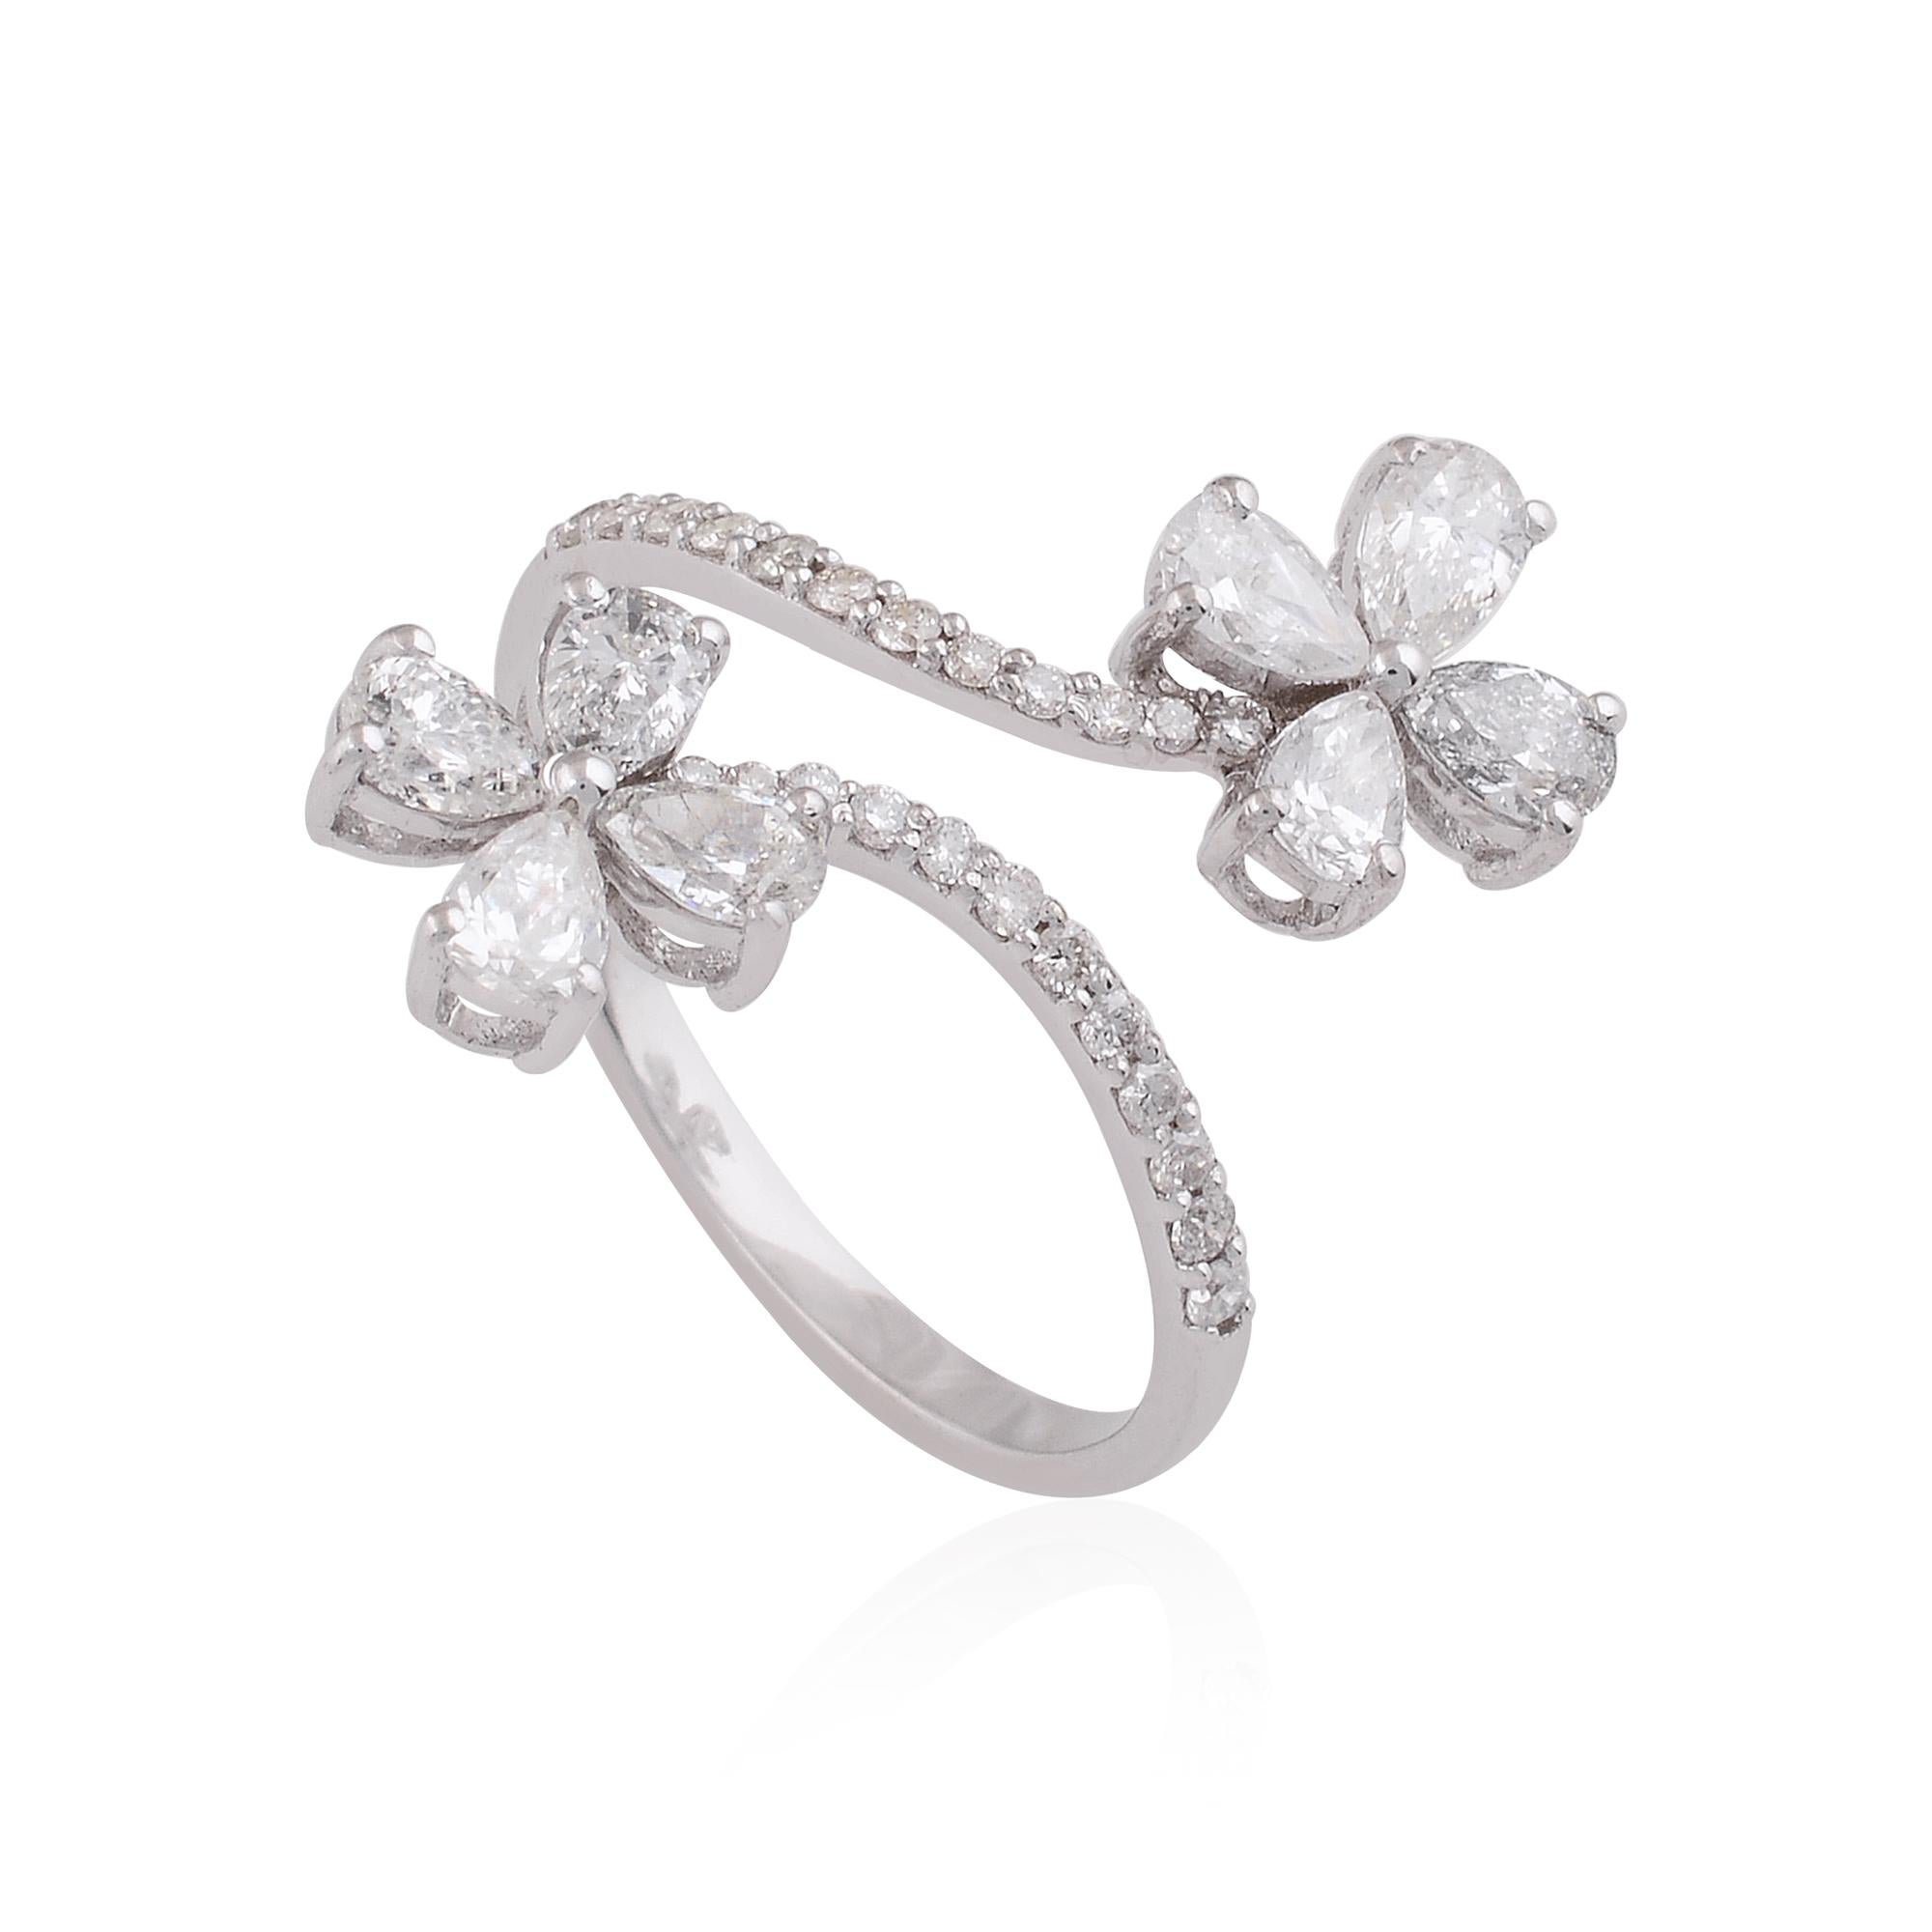 For Sale:  SI Clarity HI Color Pear Diamond Double Flower Wrap Ring 14k White Gold Jewelry 4